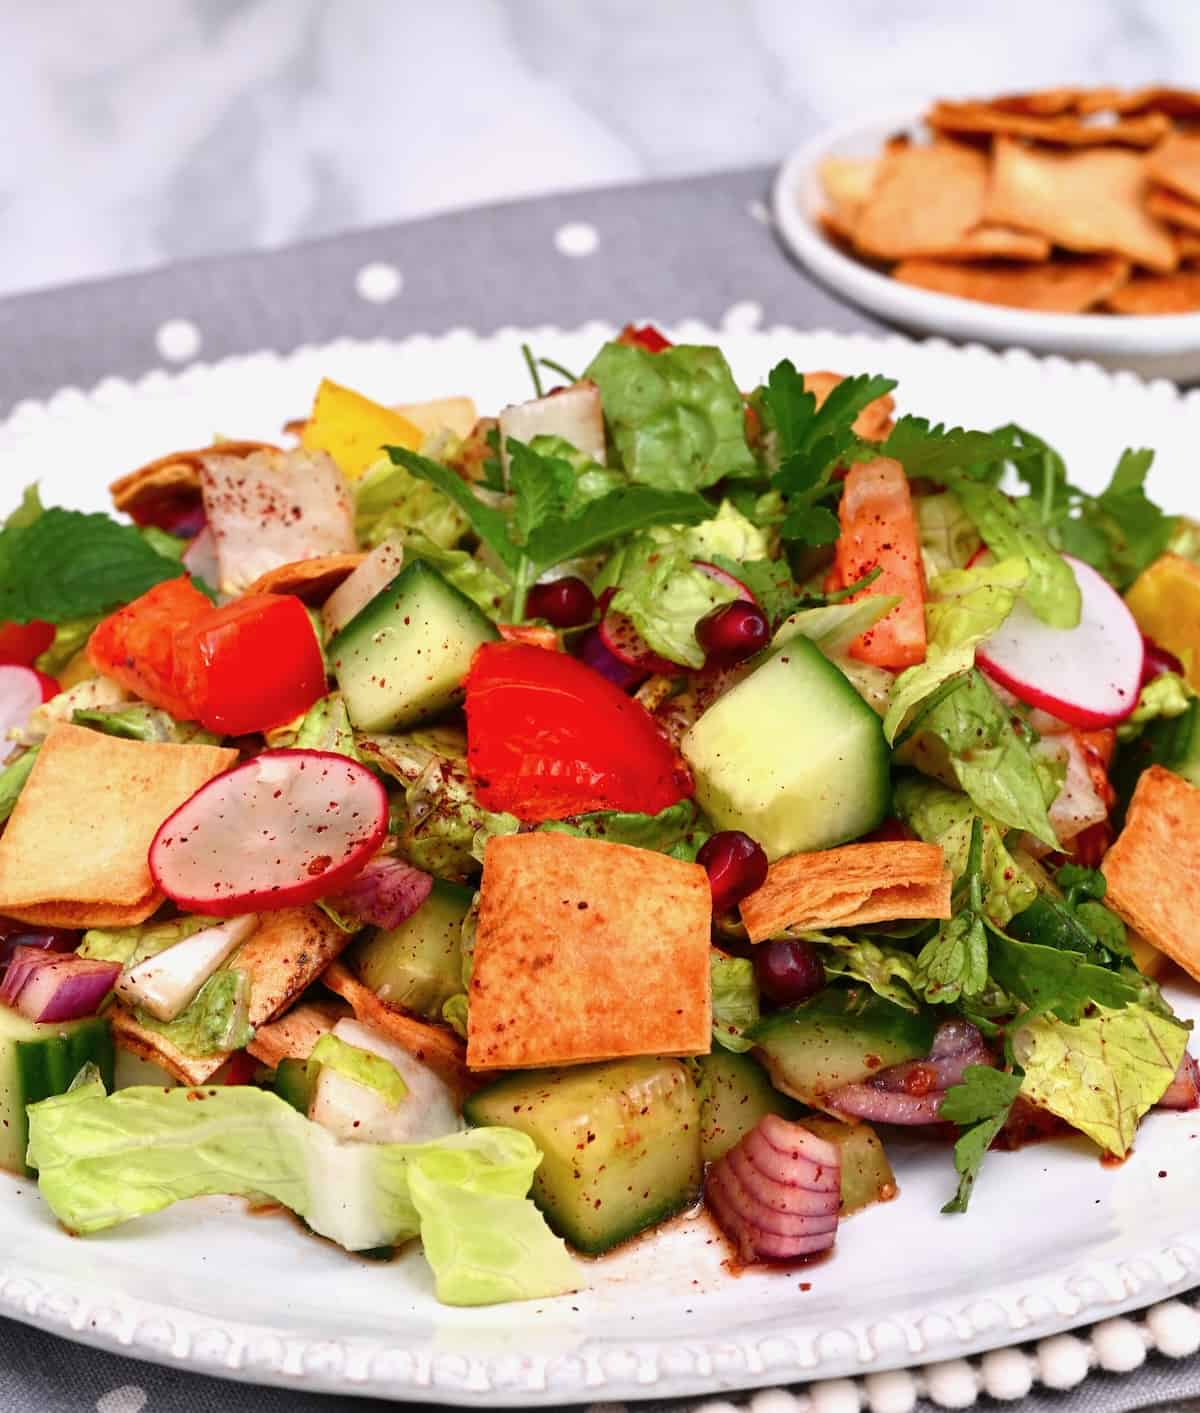 A serving of Lebanese fattoush salad topped with mint